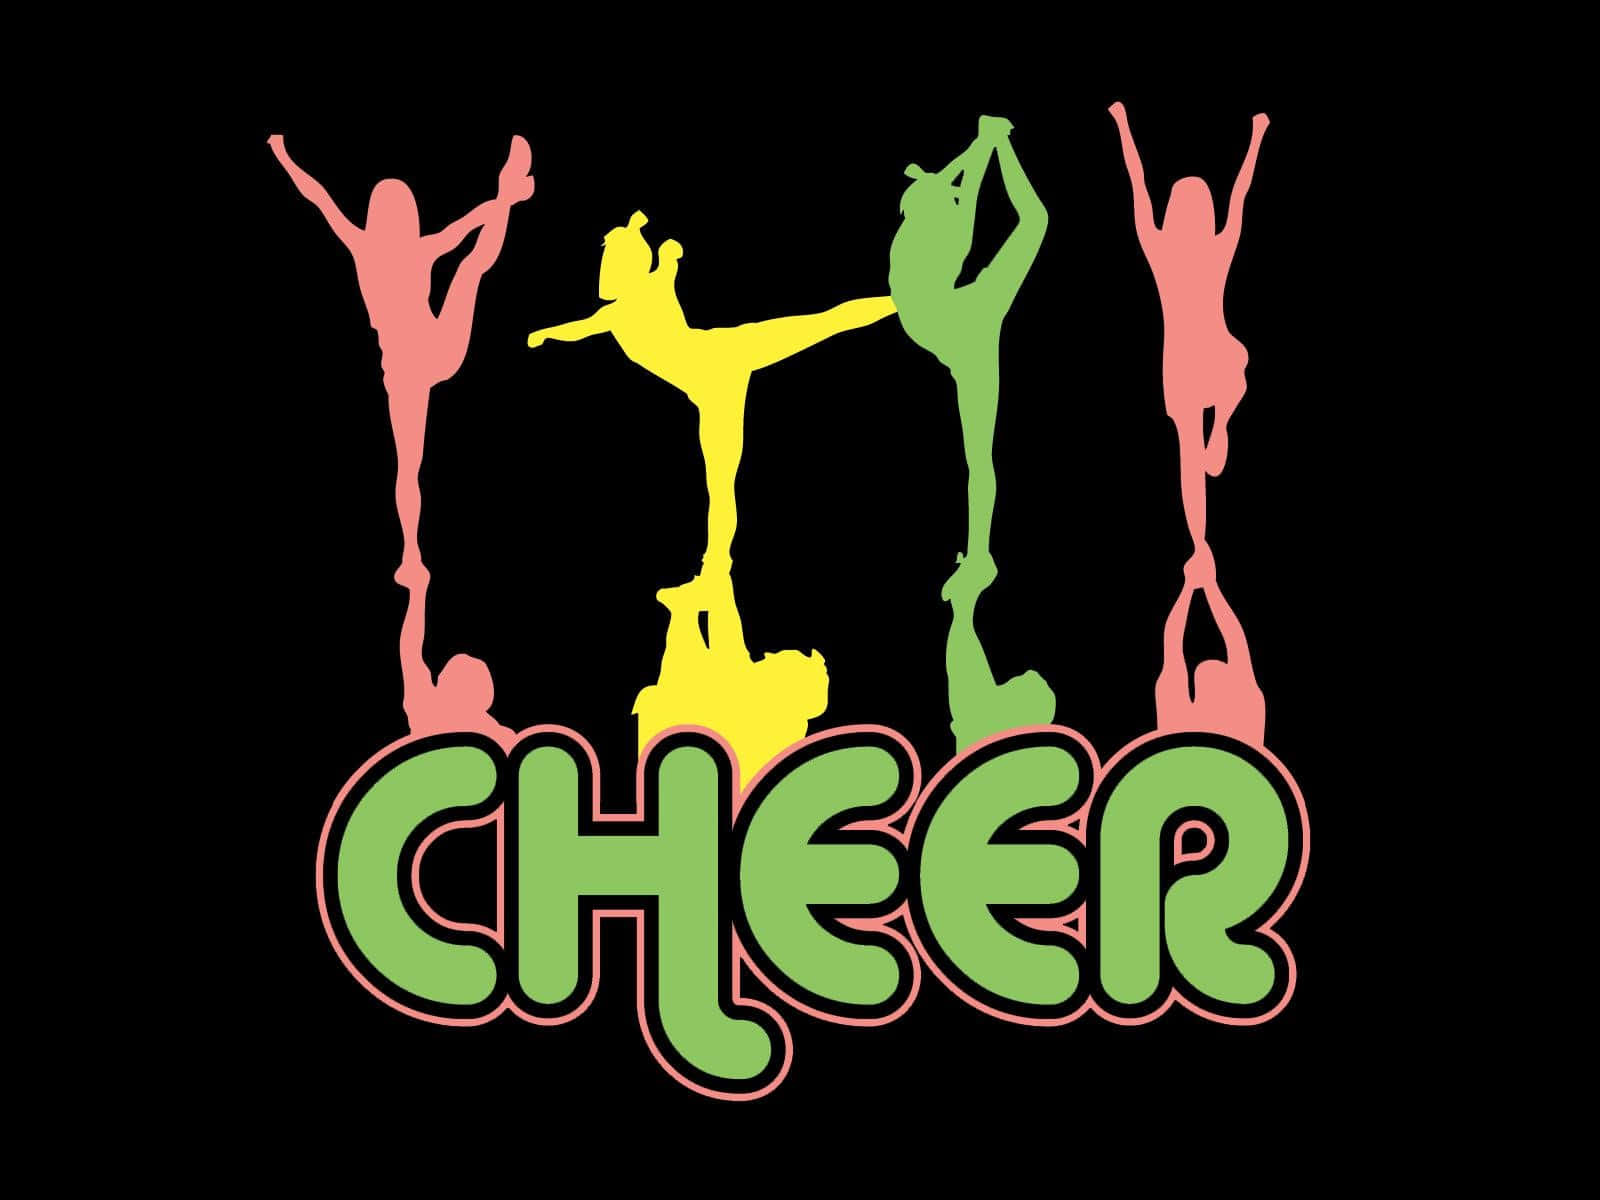 Colorful Cheerleading Silhouettes Graphic Wallpaper